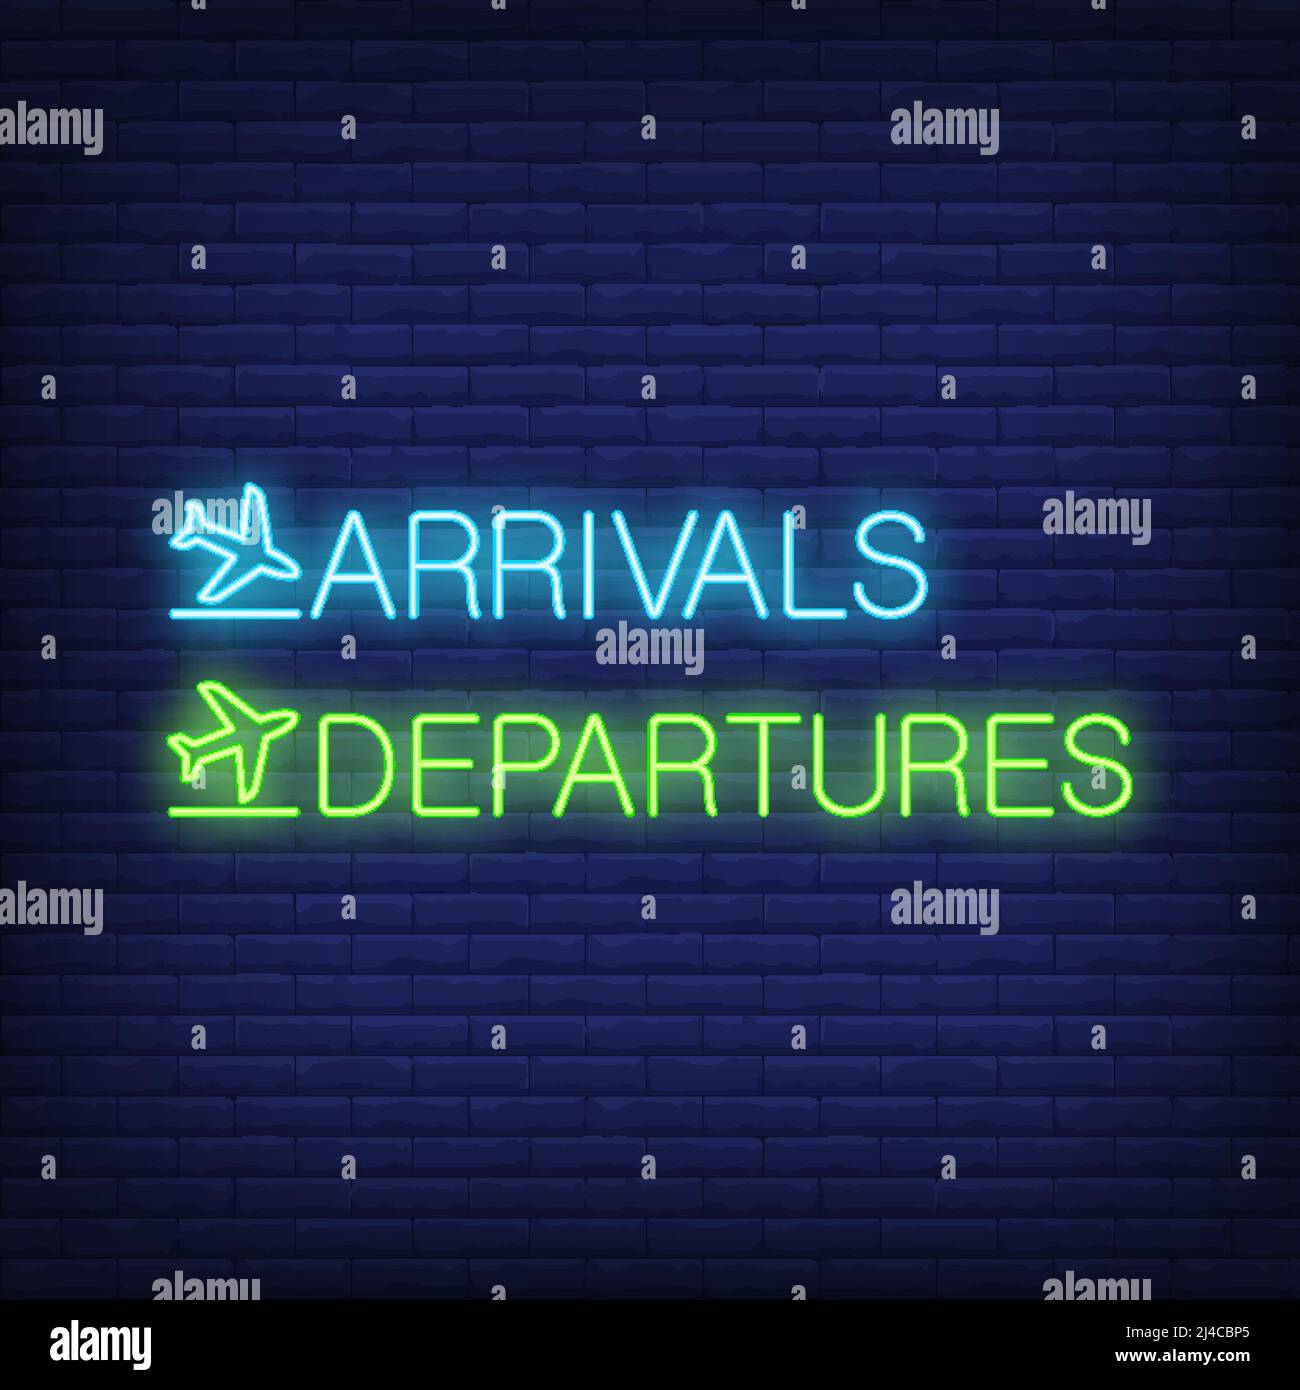 Arrivals and departures neon sign. Information design. Night bright neon sign, colorful billboard, light banner. Vector illustration in neon style. Stock Vector